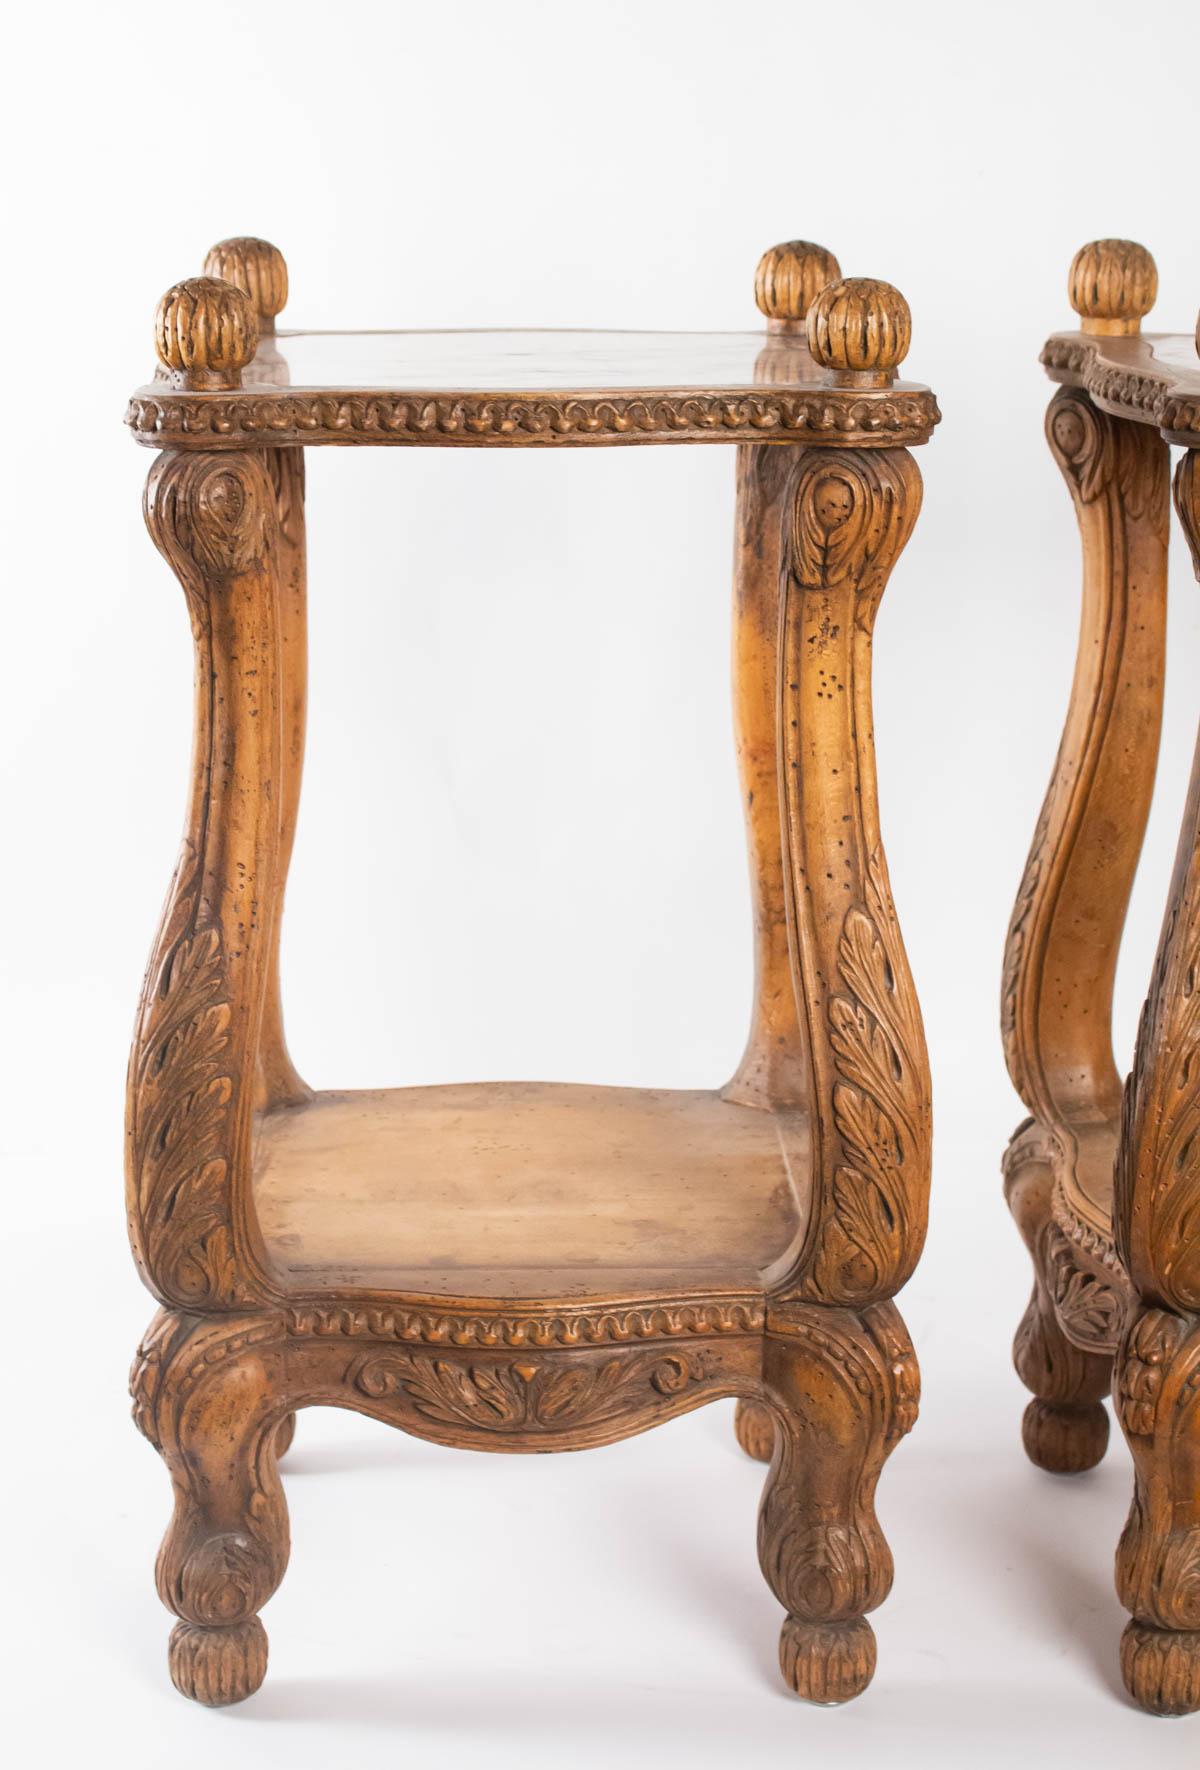 Pair of Bedside or Sofa End Light Wood, Carved Regency Style (Napoleon III.)